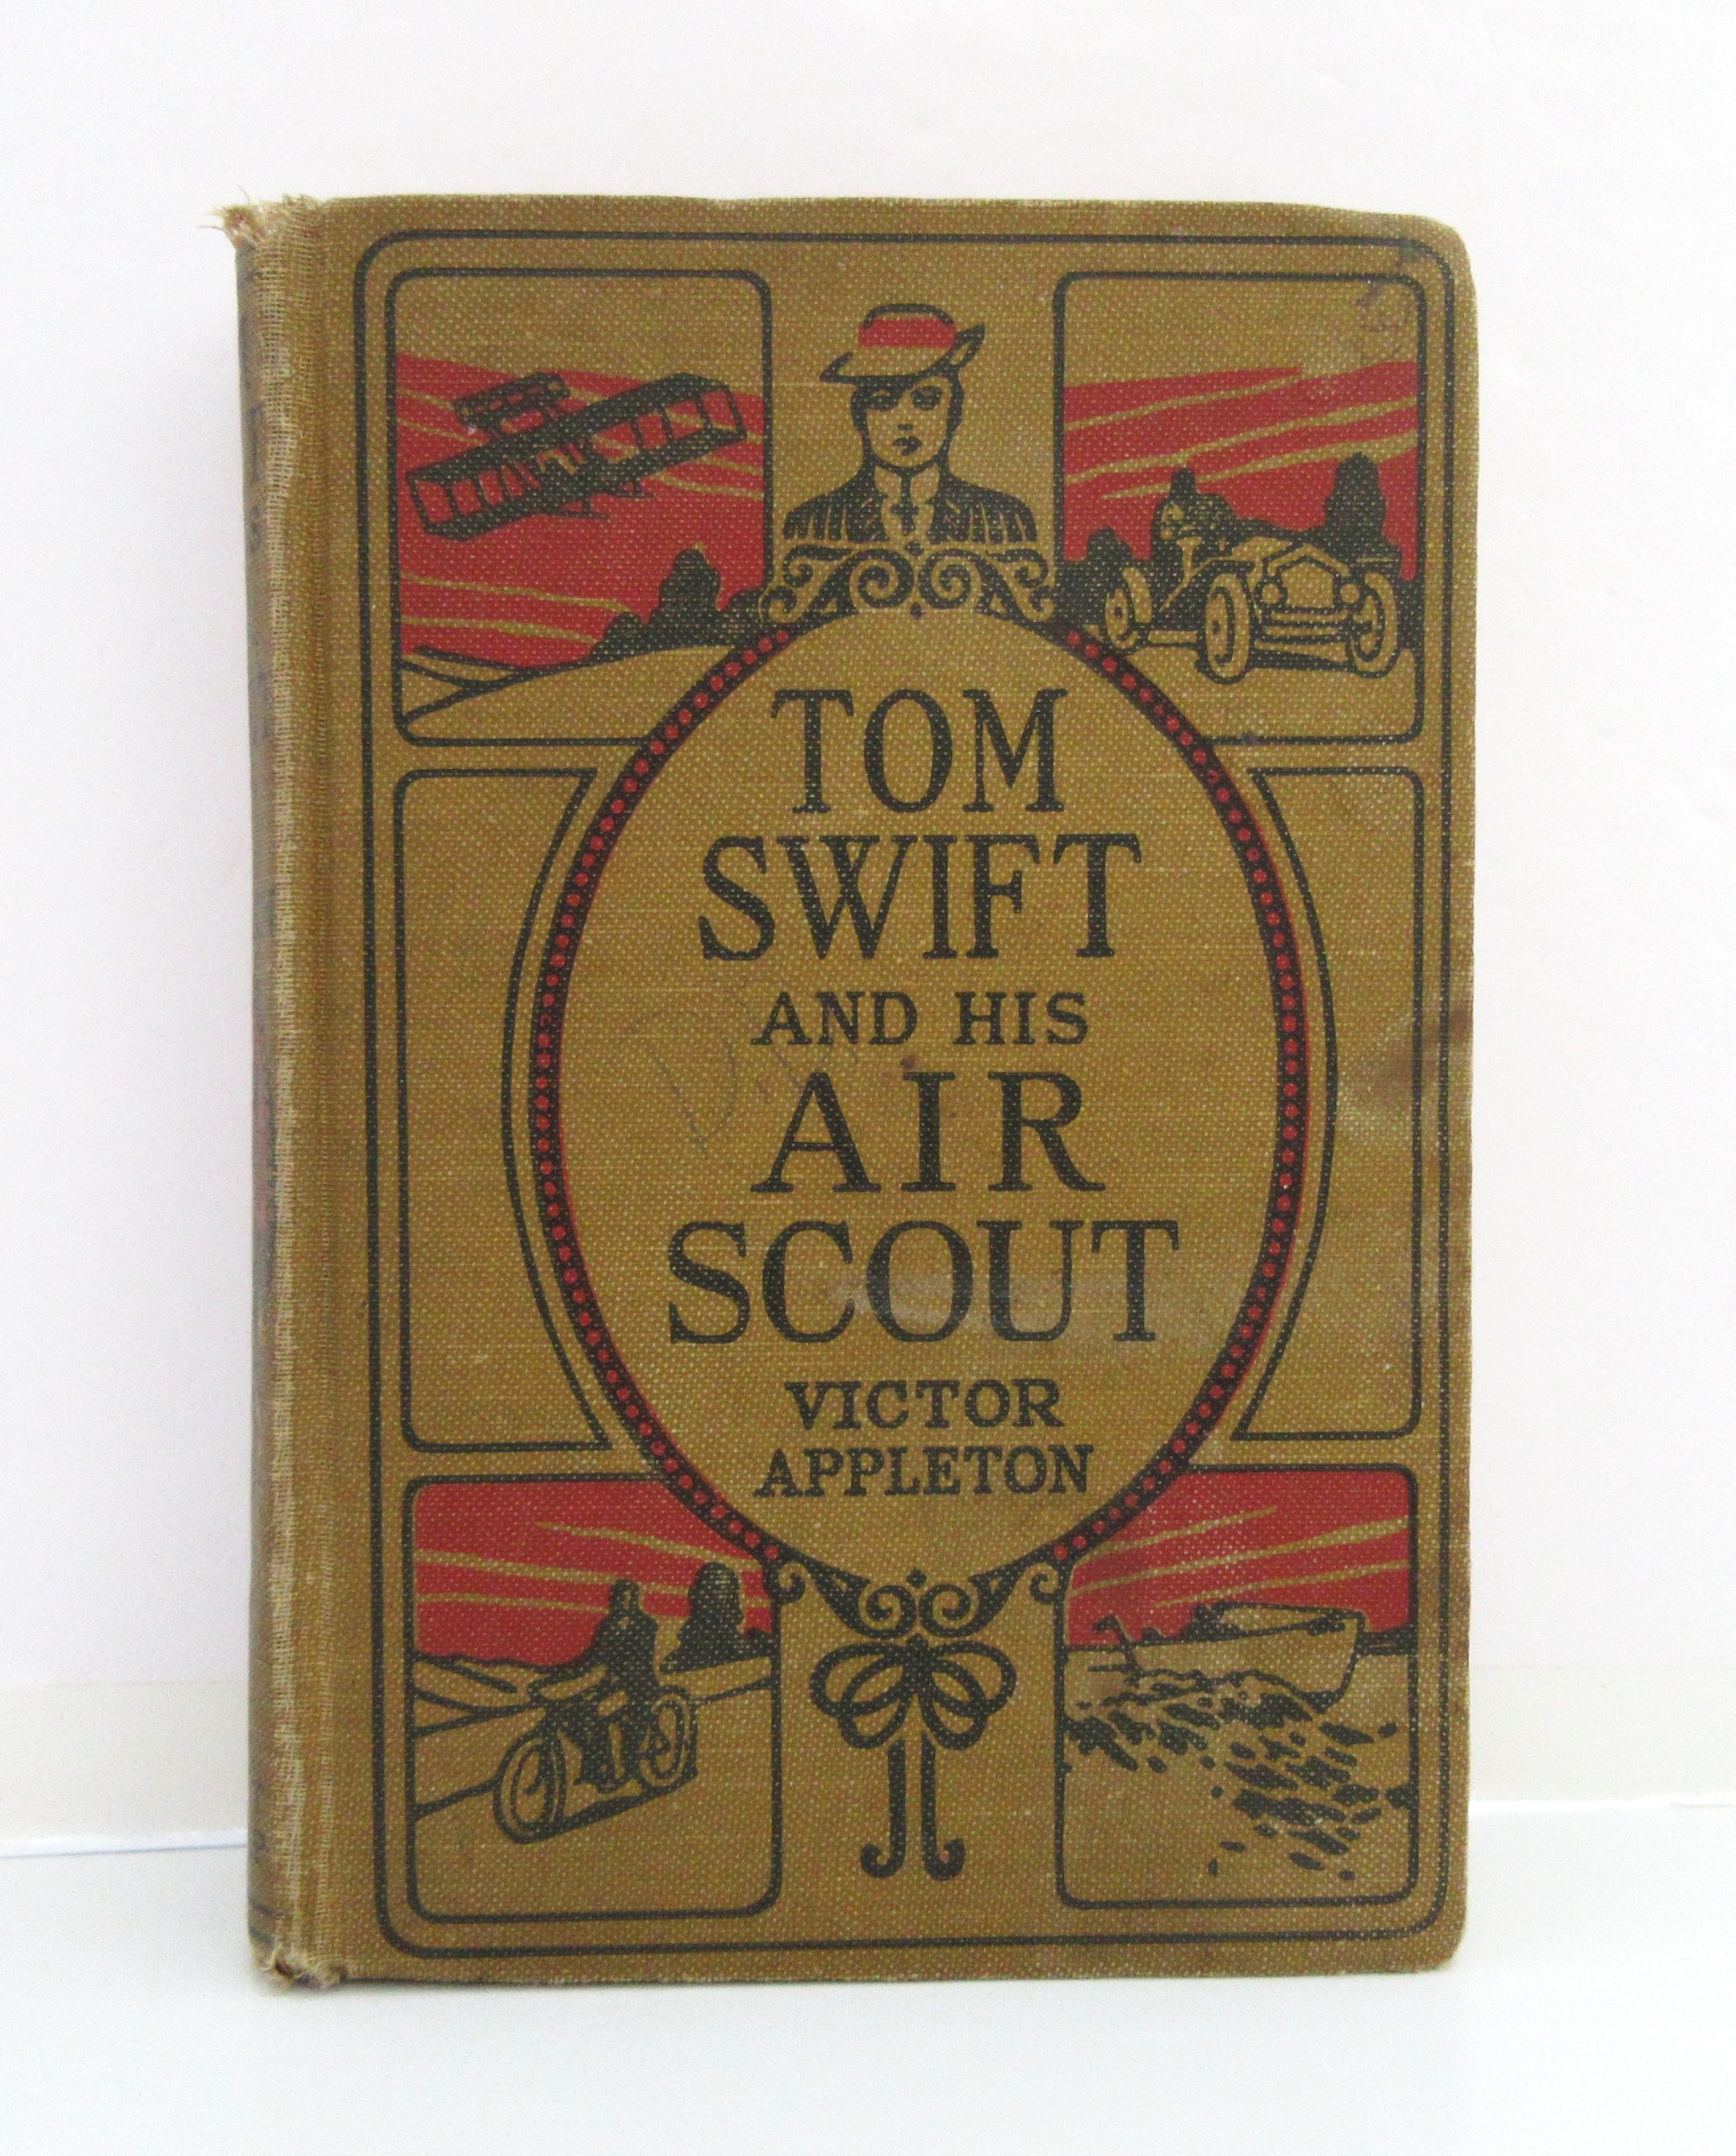 Tom Swift and Air Scout book image